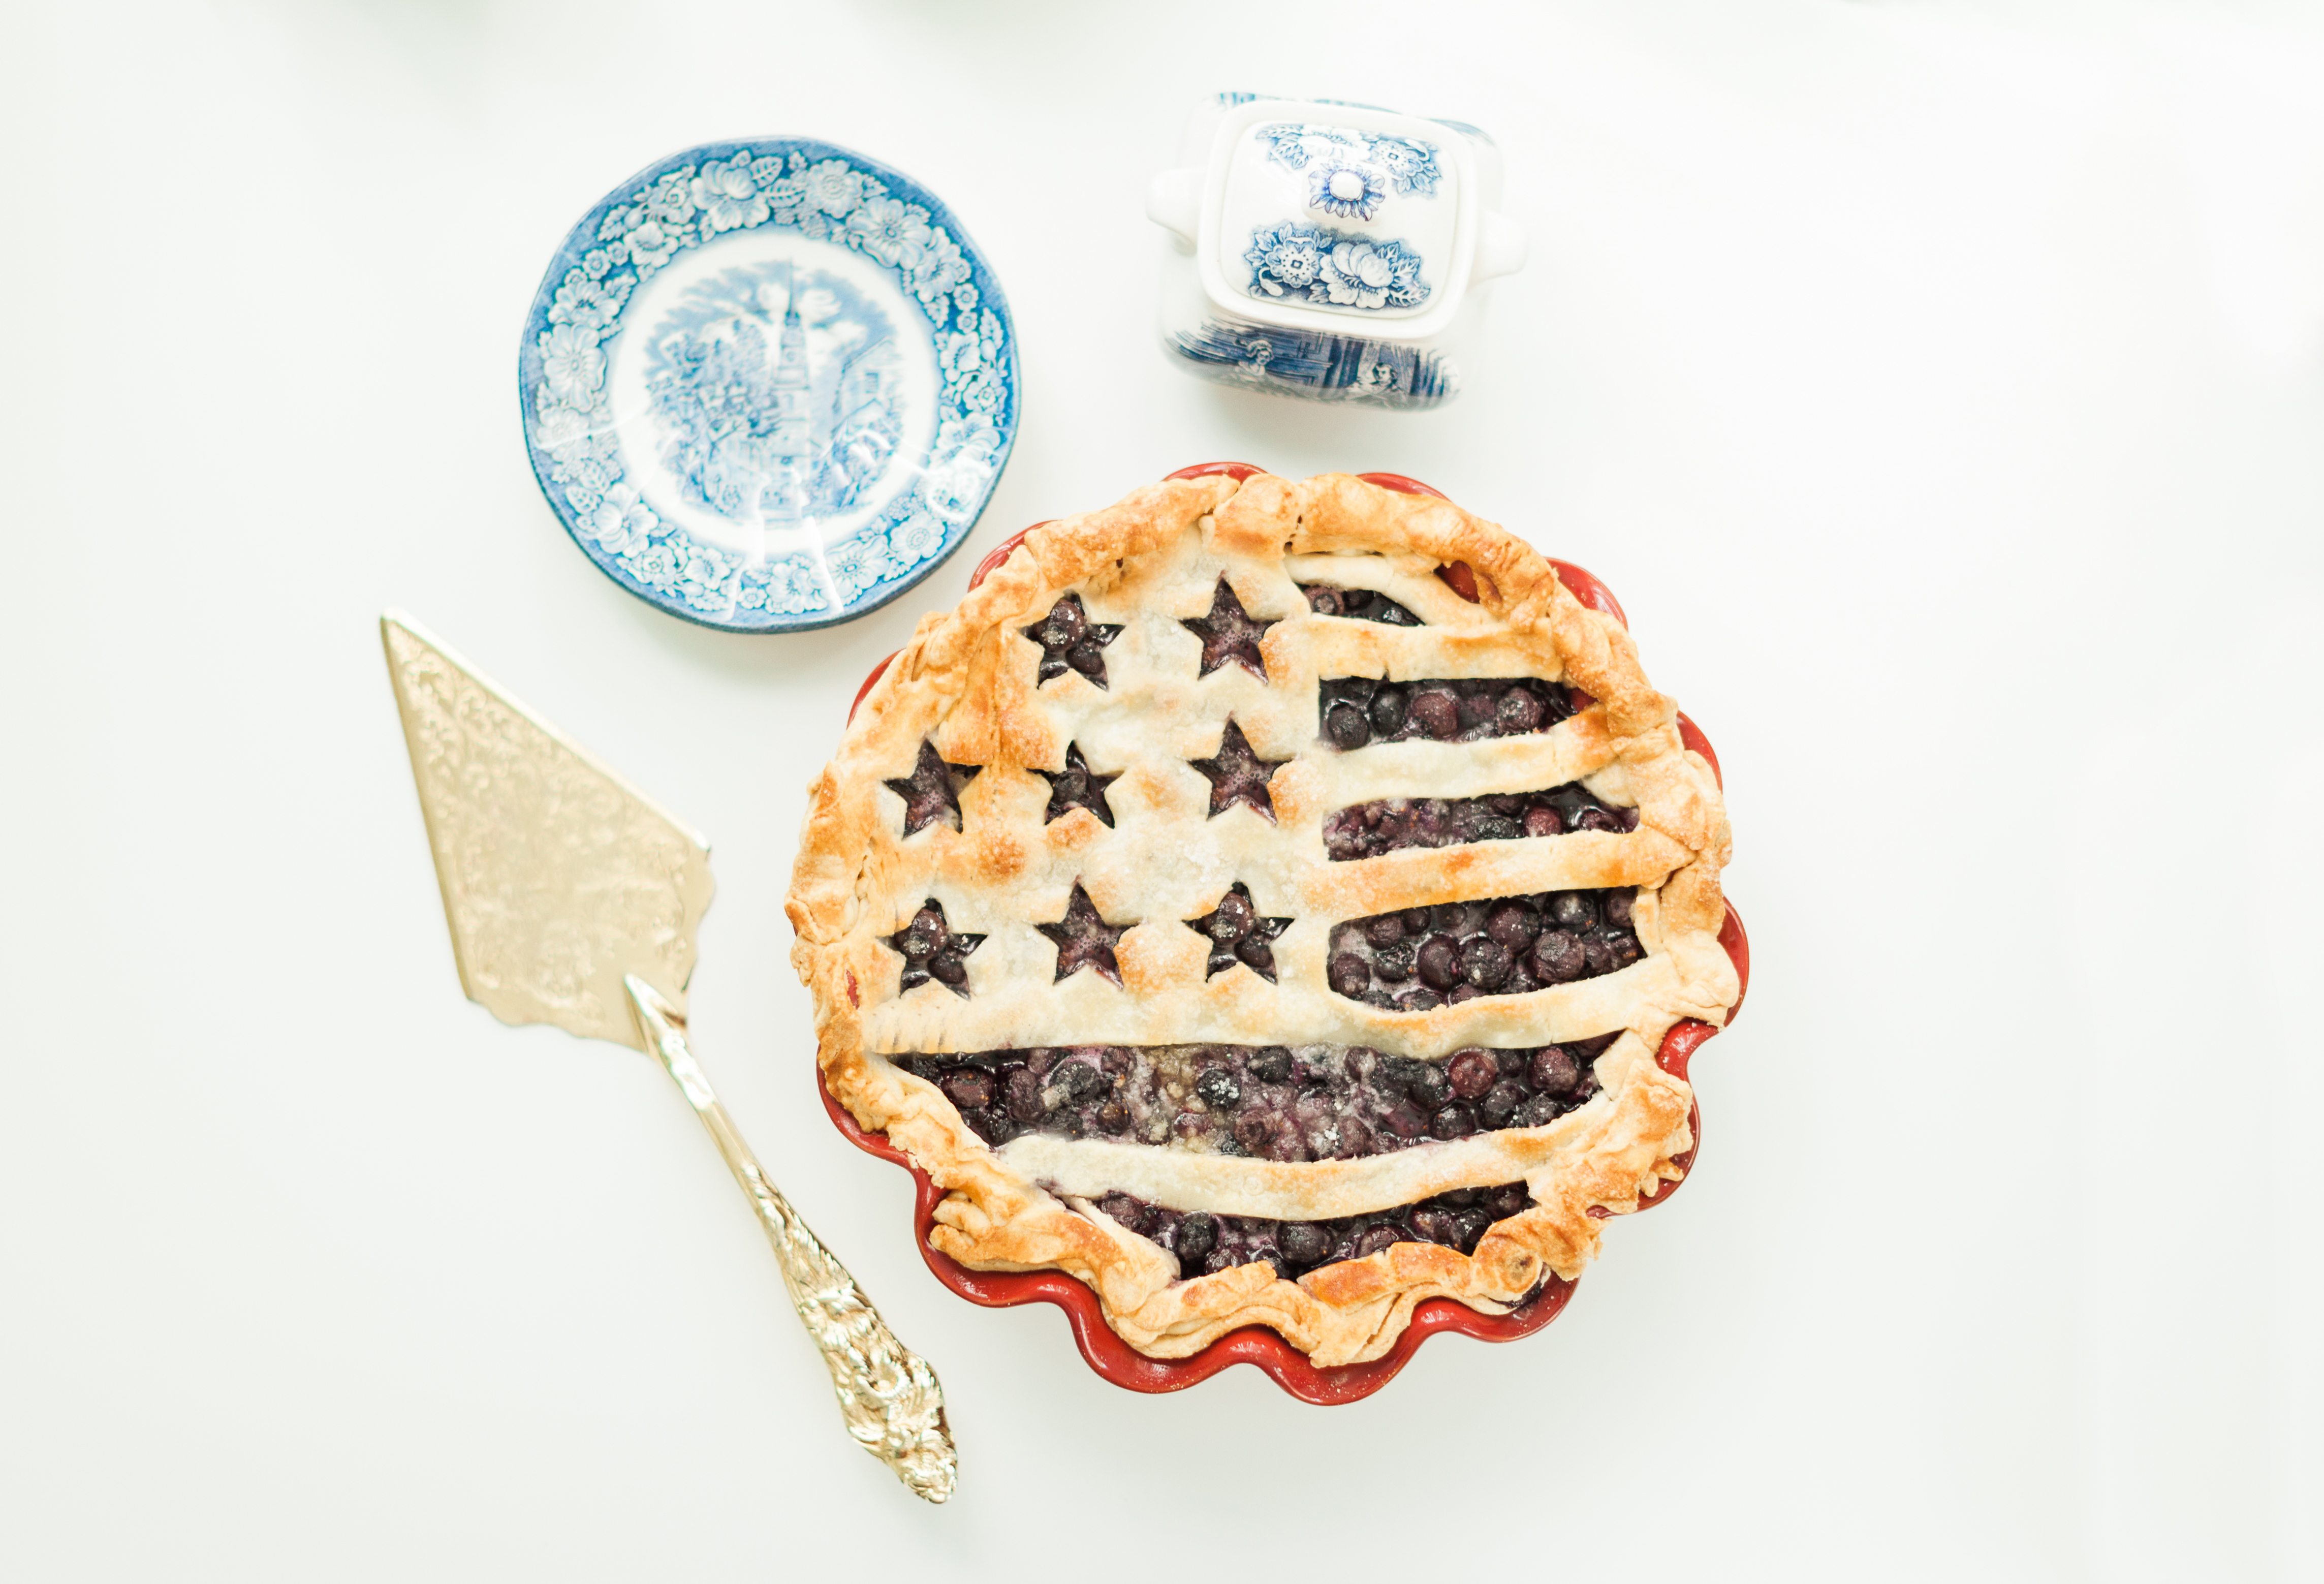 blueberry-elderflower pie, blueberry pie, pie, American pie, USA, Independence Day, Independence Day Cookout, Cookout, comfort food, baked goods, baking, homemade, fresh